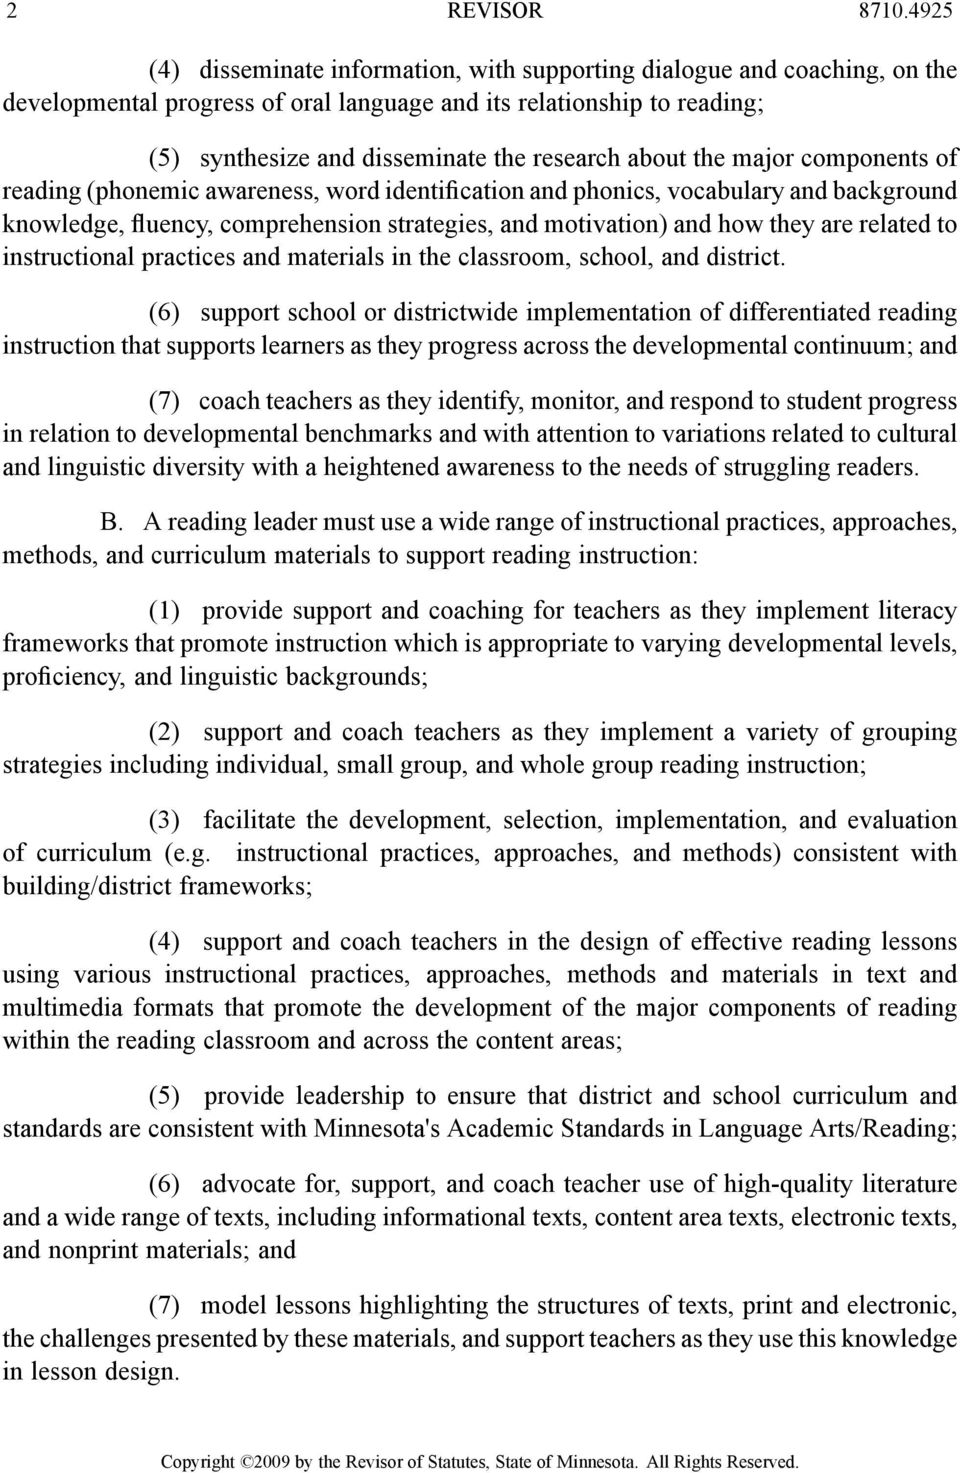 about the major components of reading (phonemic awareness, word identification and phonics, vocabulary and background knowledge, fluency, comprehension strategies, and motivation) and how they are